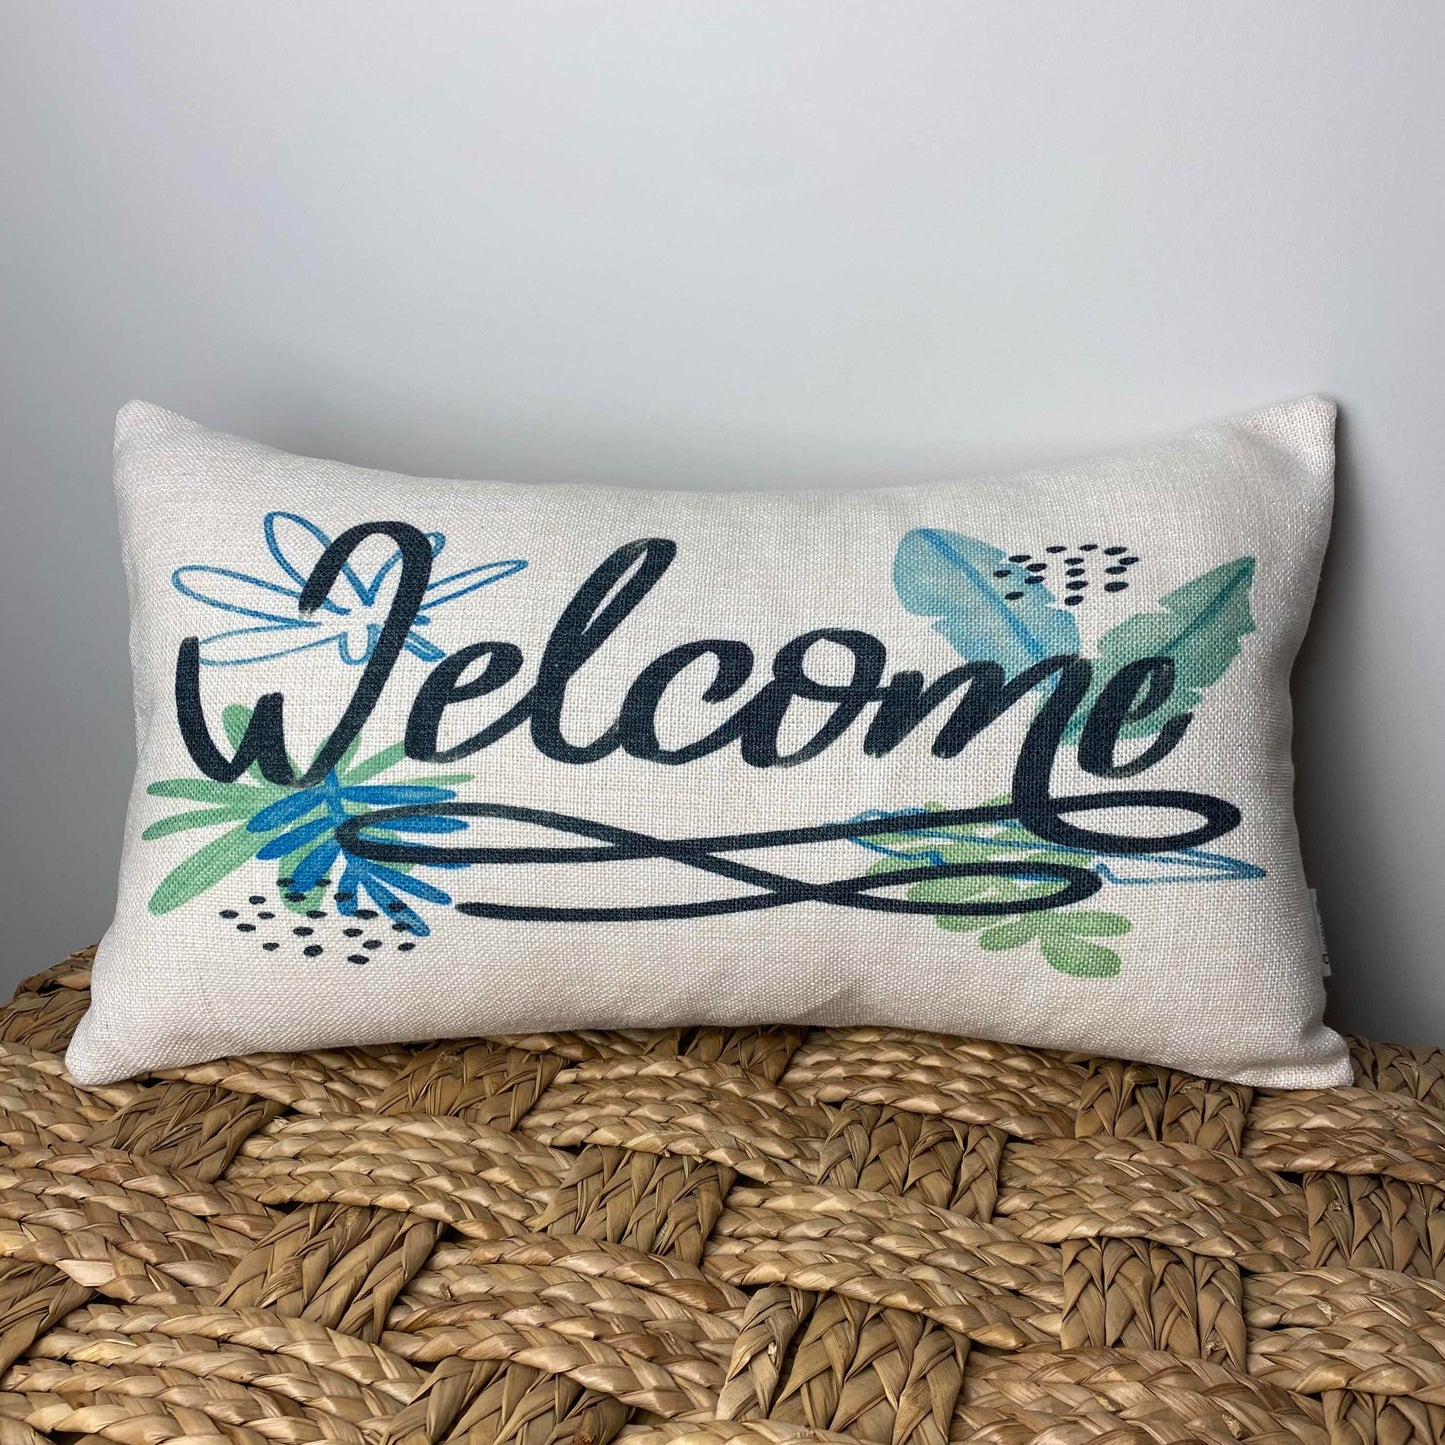 Welcome pillow 12" x 20"